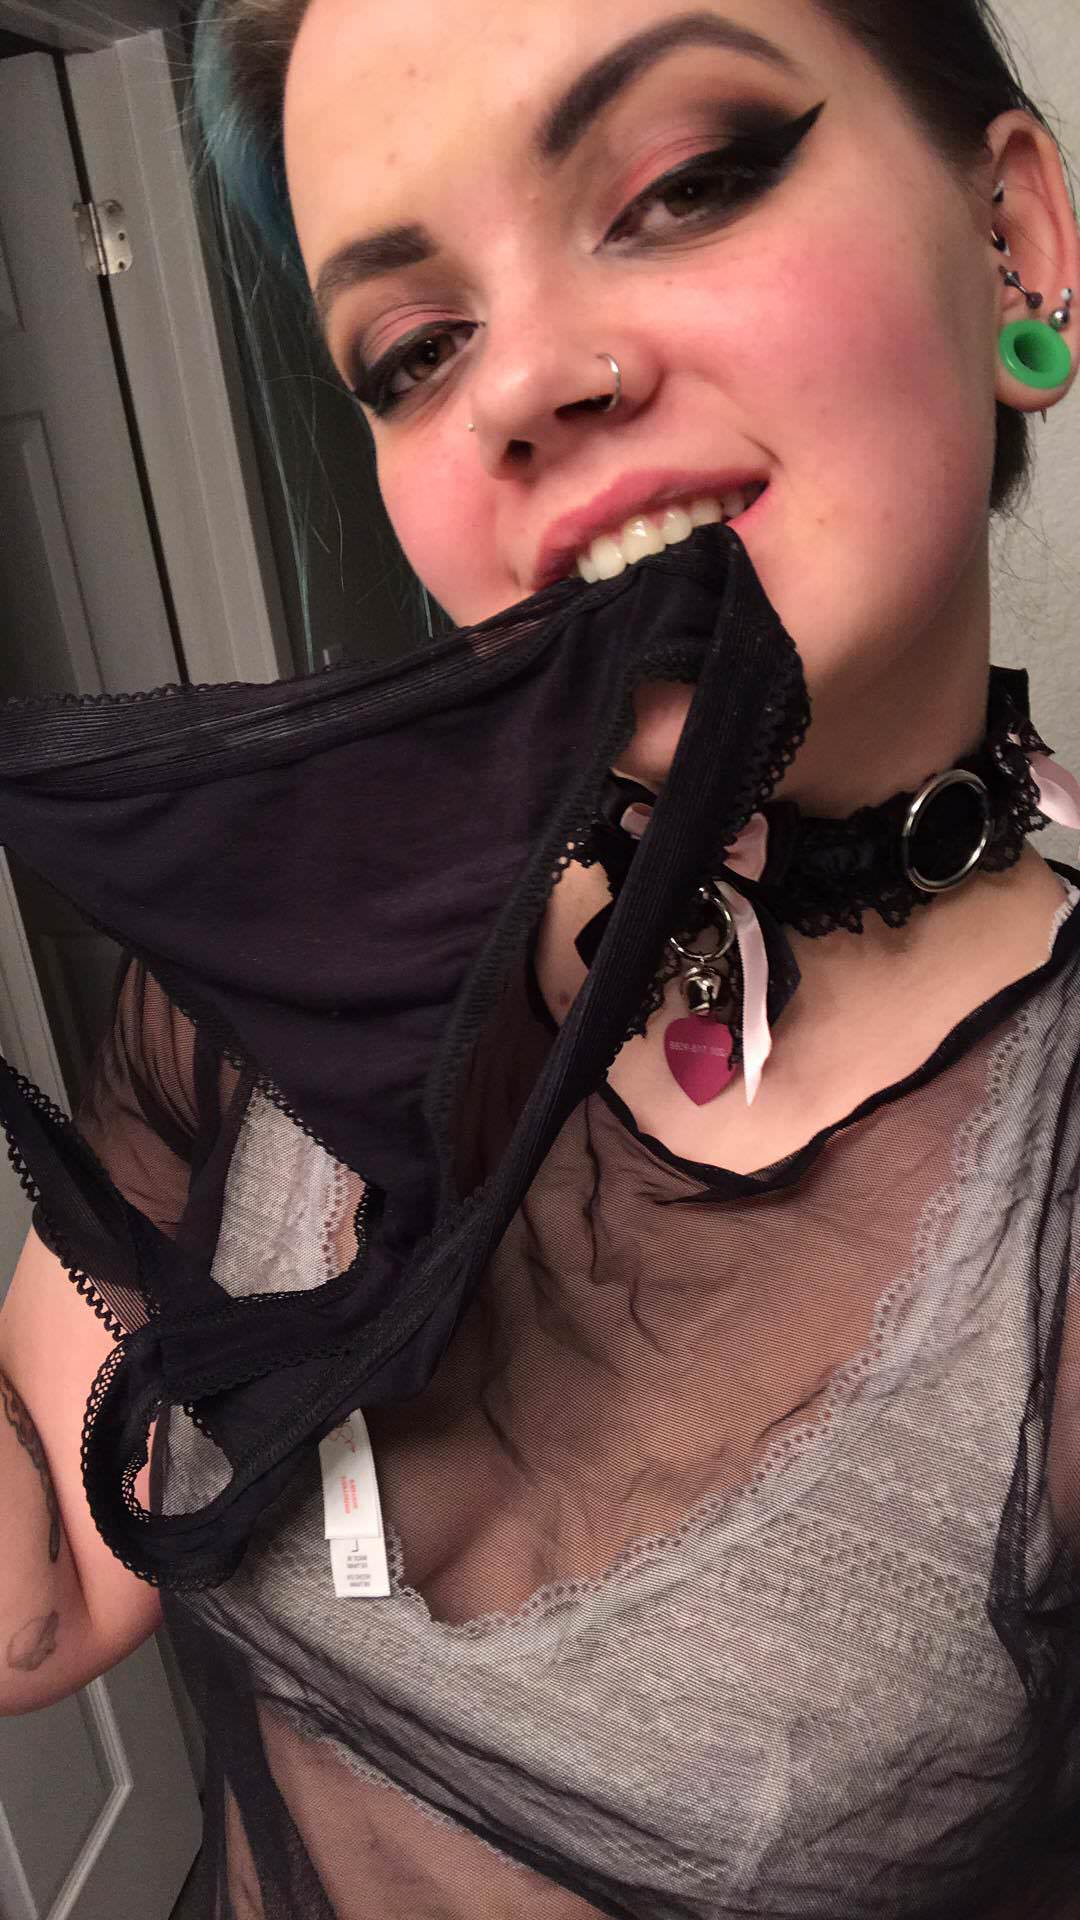 Tiny Tits Teen with Red Hot Lipstick Poses with Her Hands Above her Head.